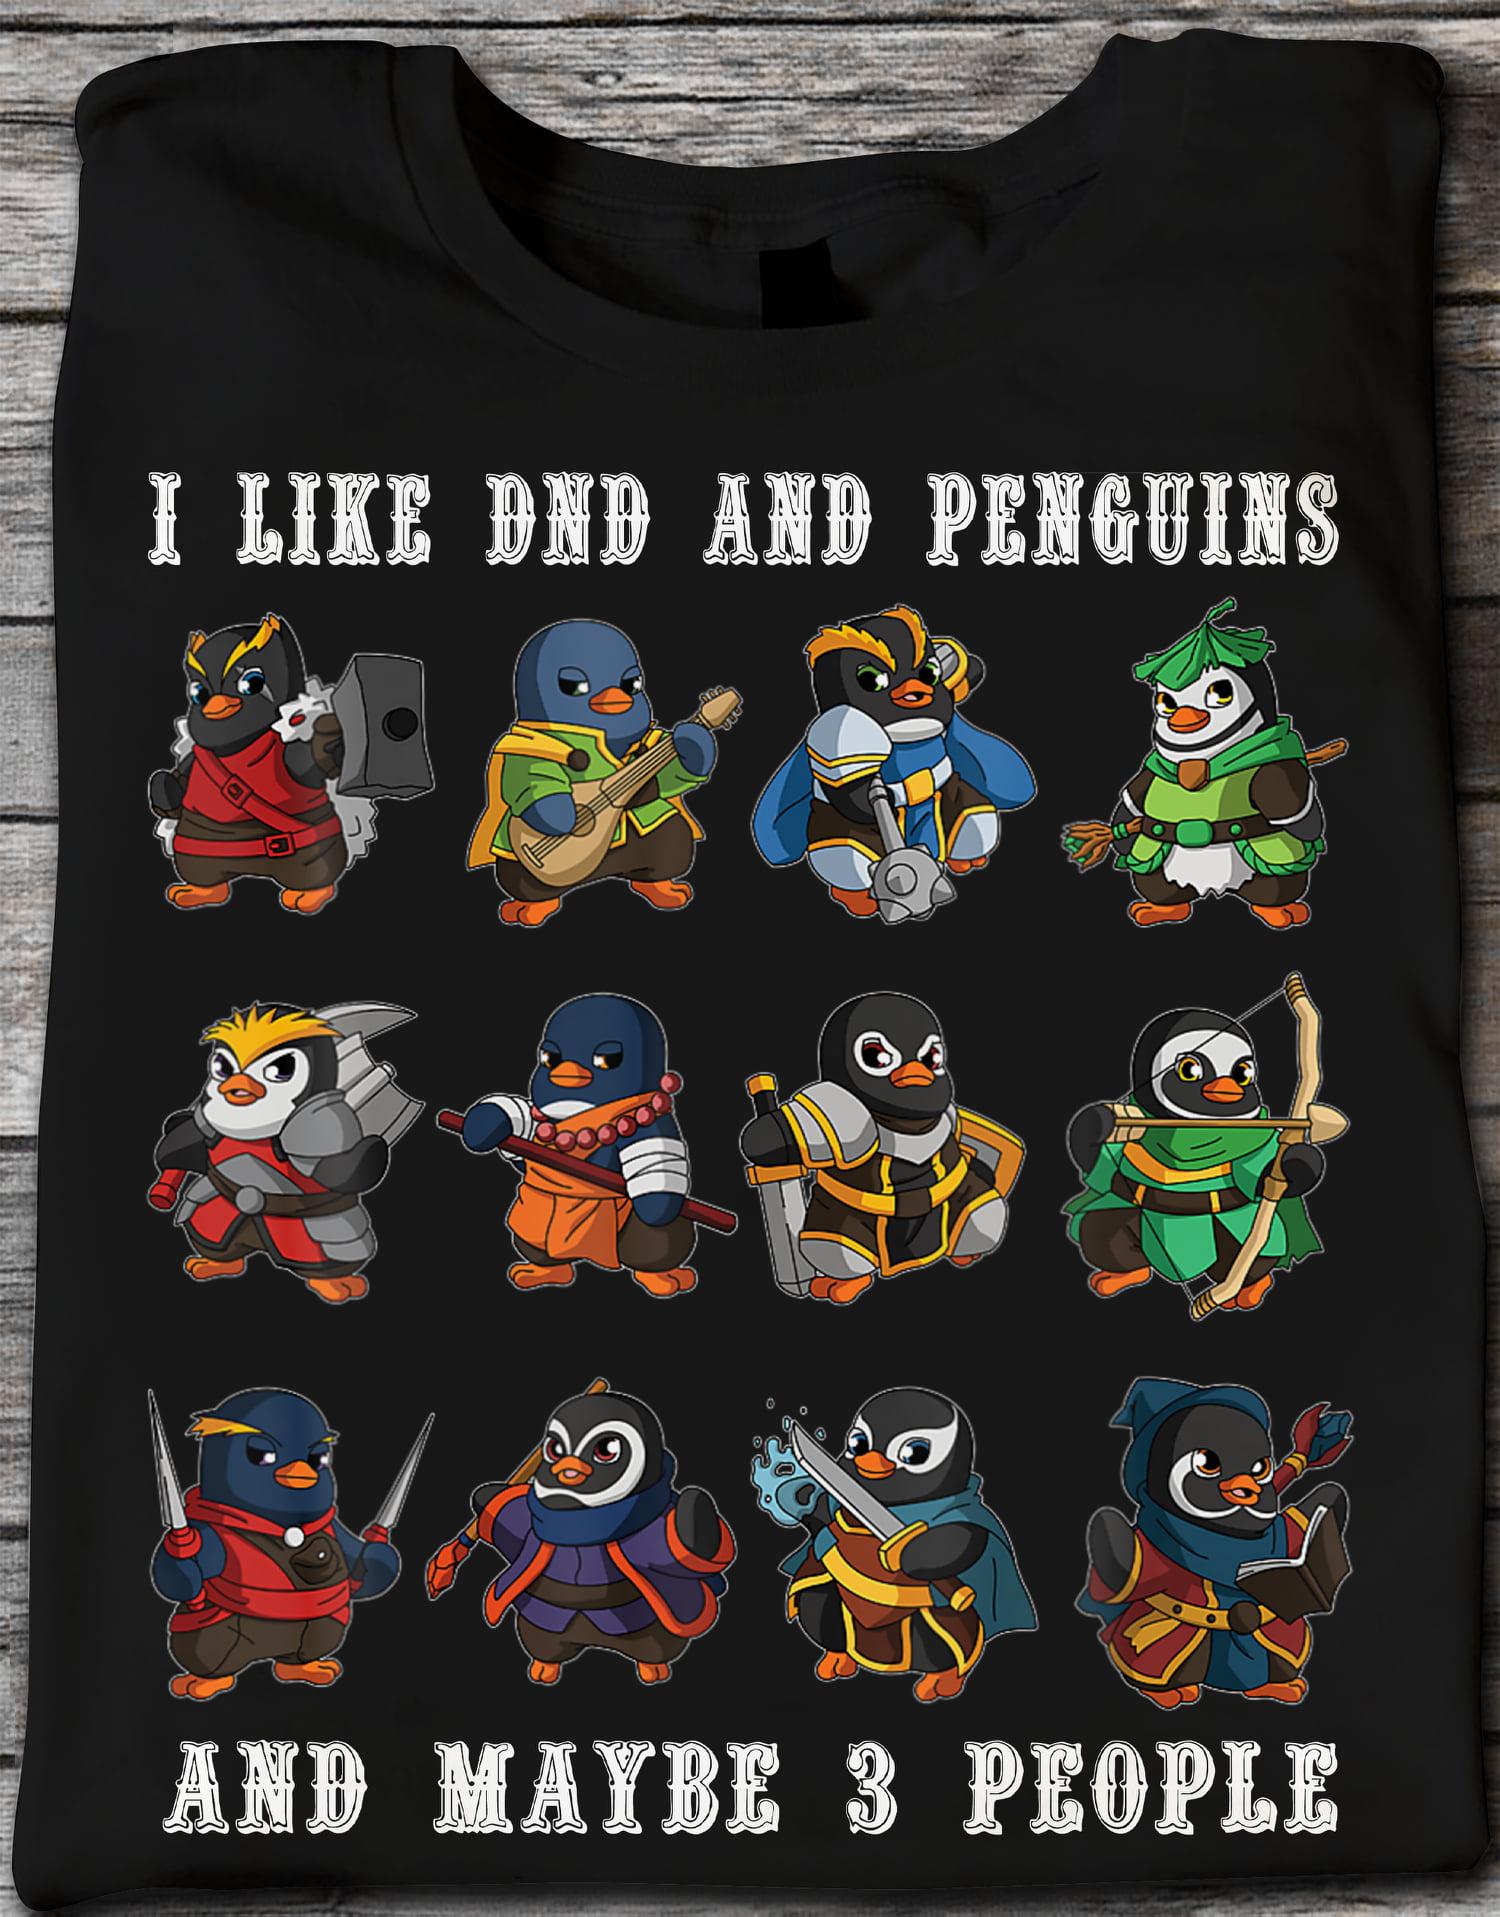 I like DnD and penguins and maybe 3 people - Dragons and Dungeons, penguin DnD costume